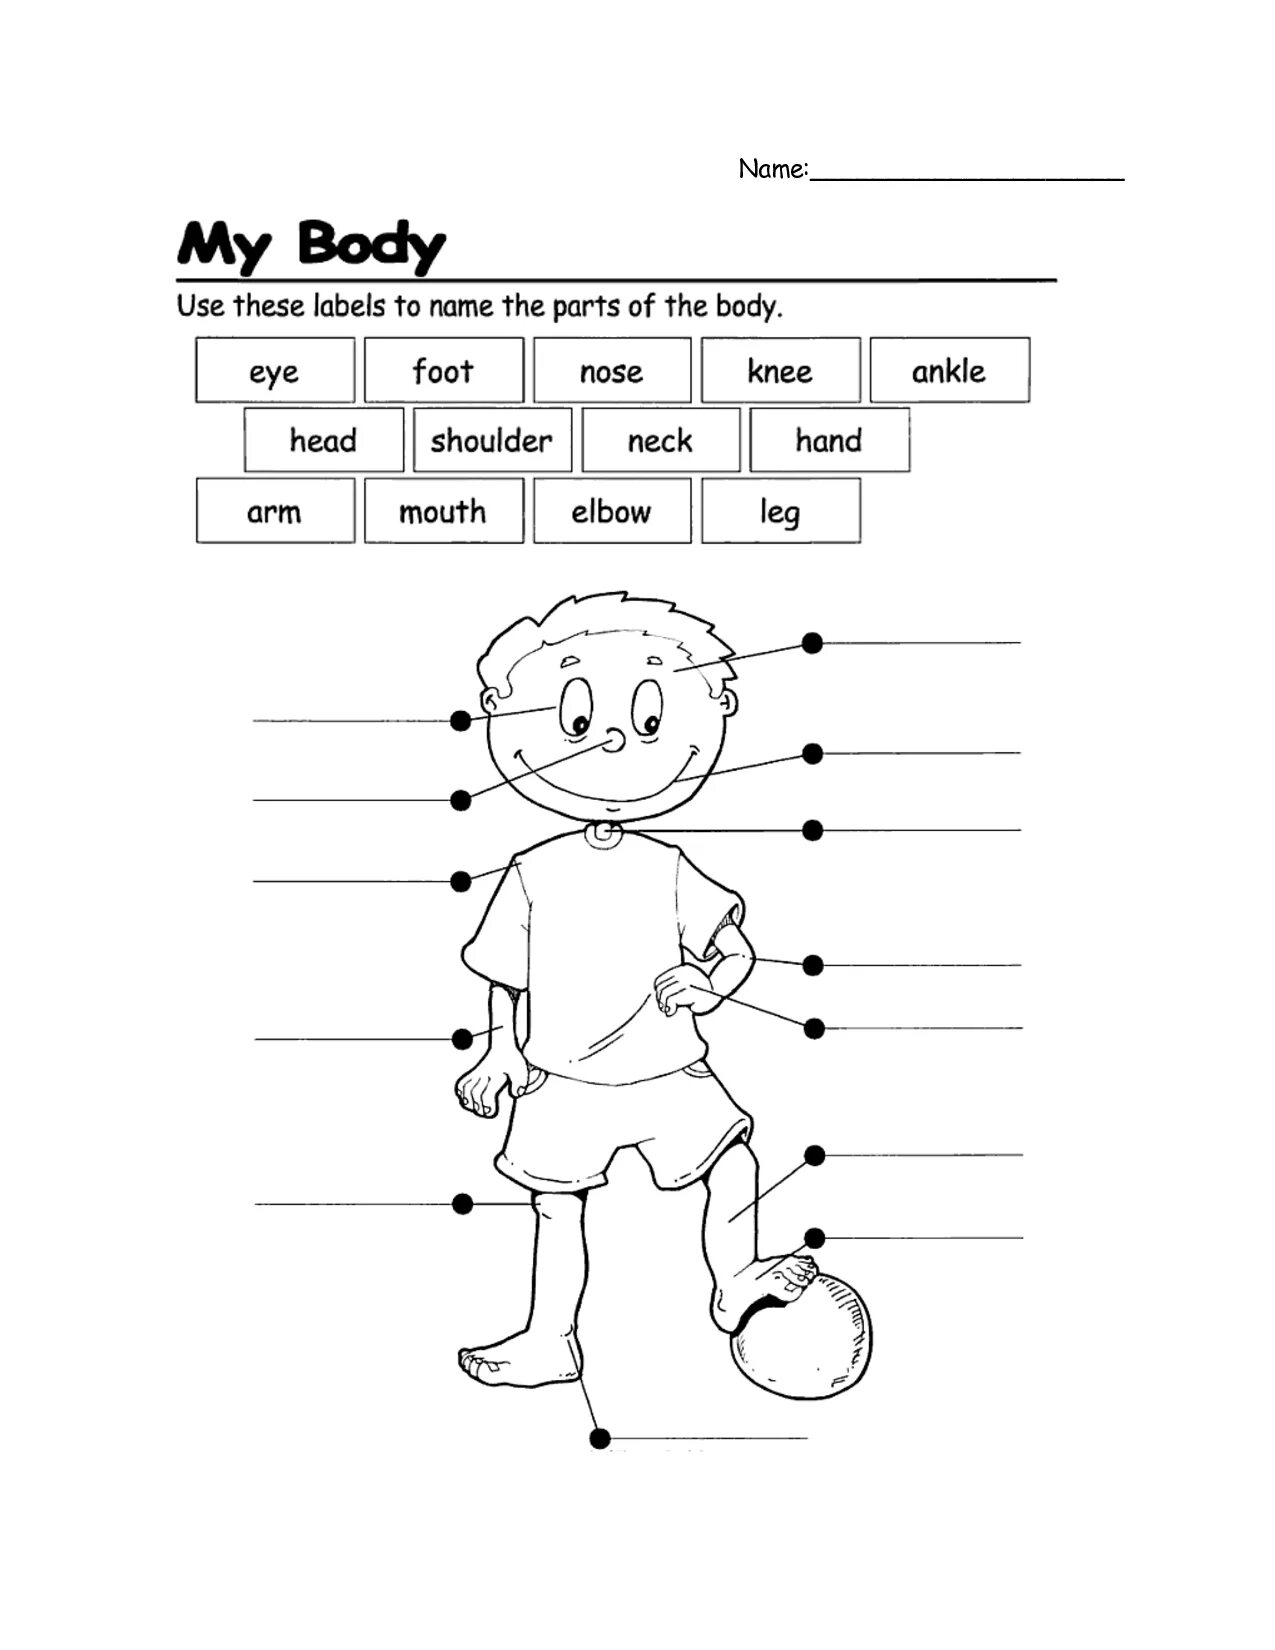 Parts of the body Worksheets for Kids. Parts of the body Worksheets for Kids 3 класс. Worksheets my body 3 класс. Body Parts for Kids задания. Use the words to label the